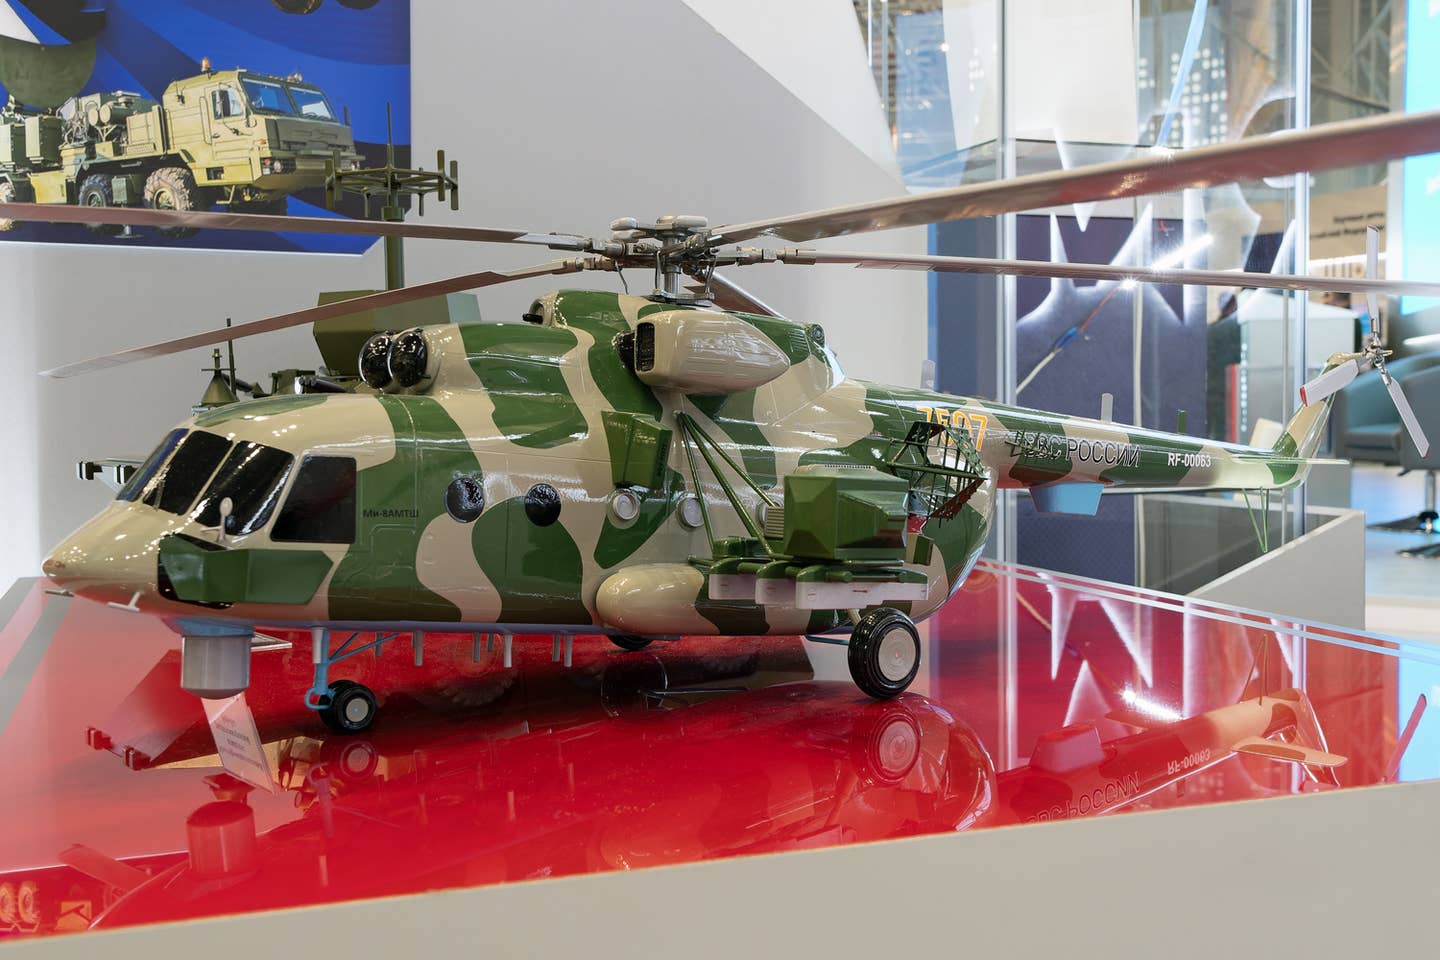 The Bosfor-2 electronic warfare helicopter shown at the ARMY-2018 exhibition. <em>Piotr Butowski</em>